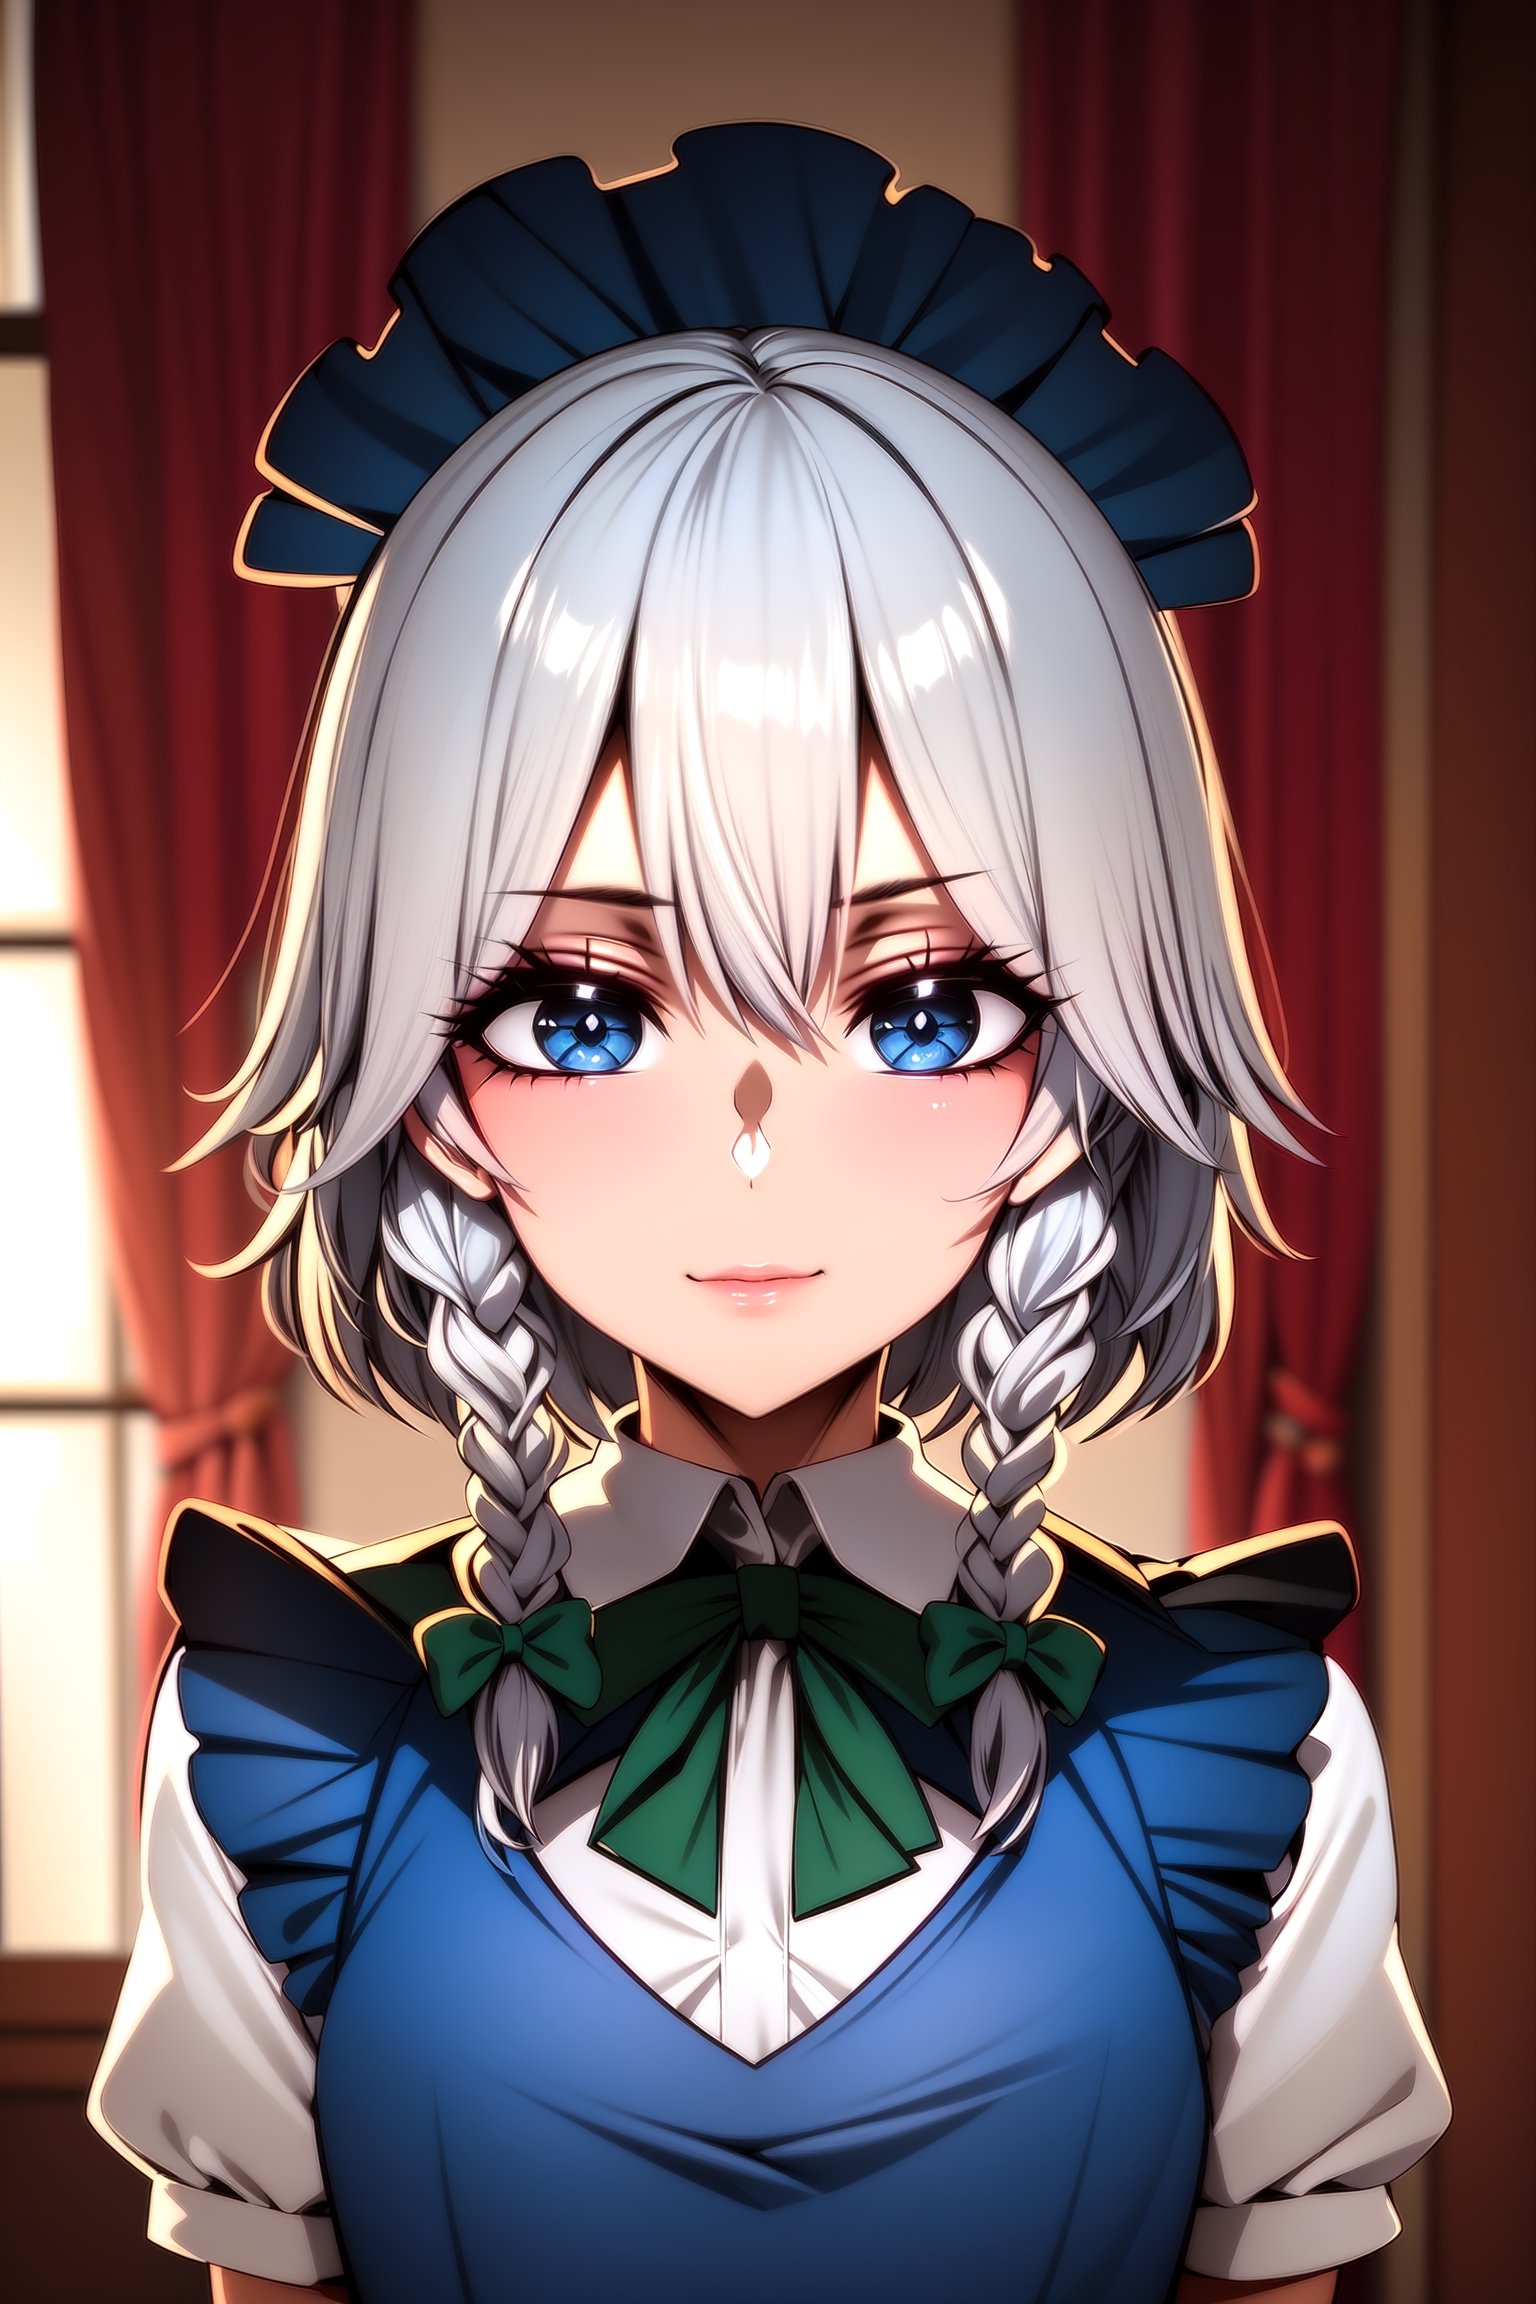 1girl, solo. gothic victorian style mansion background, indoor, she wears a fancy maid uniform,, full body character, wink. masterpiece. , masterpiece, Leering, solo, izayoi_sakuya_touhou, , , silver hair, maid dress, white apron, very short skirt,, sleeveless outfit, detailed face, detailed eyes, fresh blue eyes, big green ribbons, blue outfit, double braids, small green ribbons